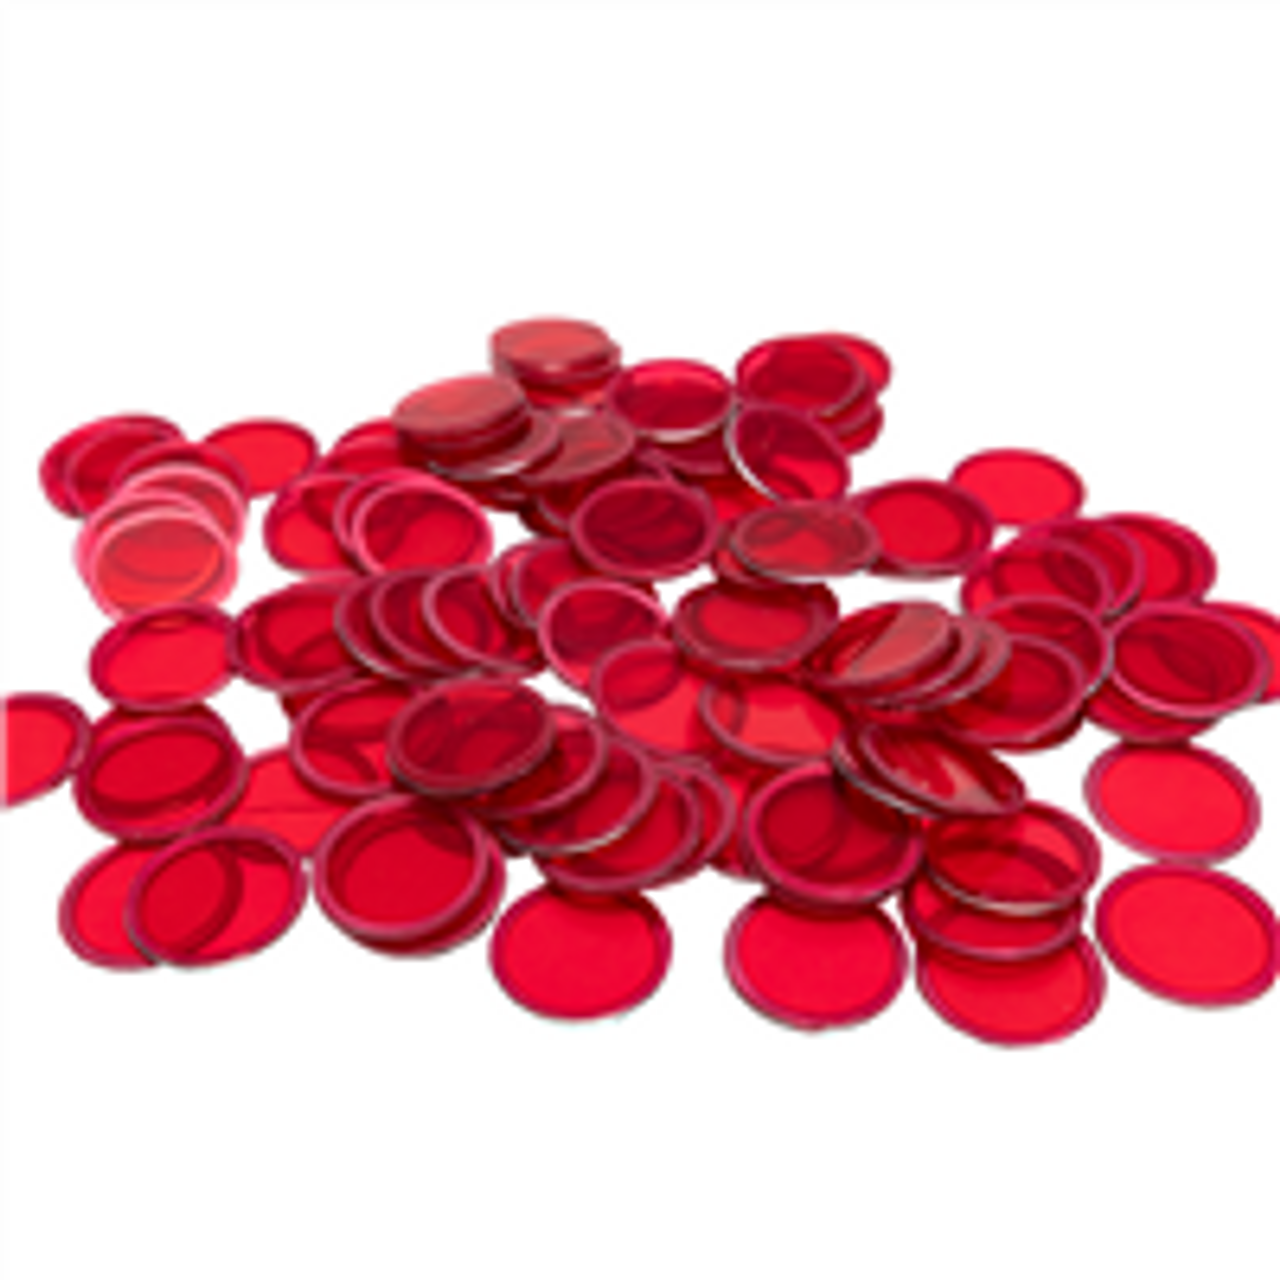 Magnetic Bingo Chips - Red - 100 chips - 3/4 inch size - Bingo Markers